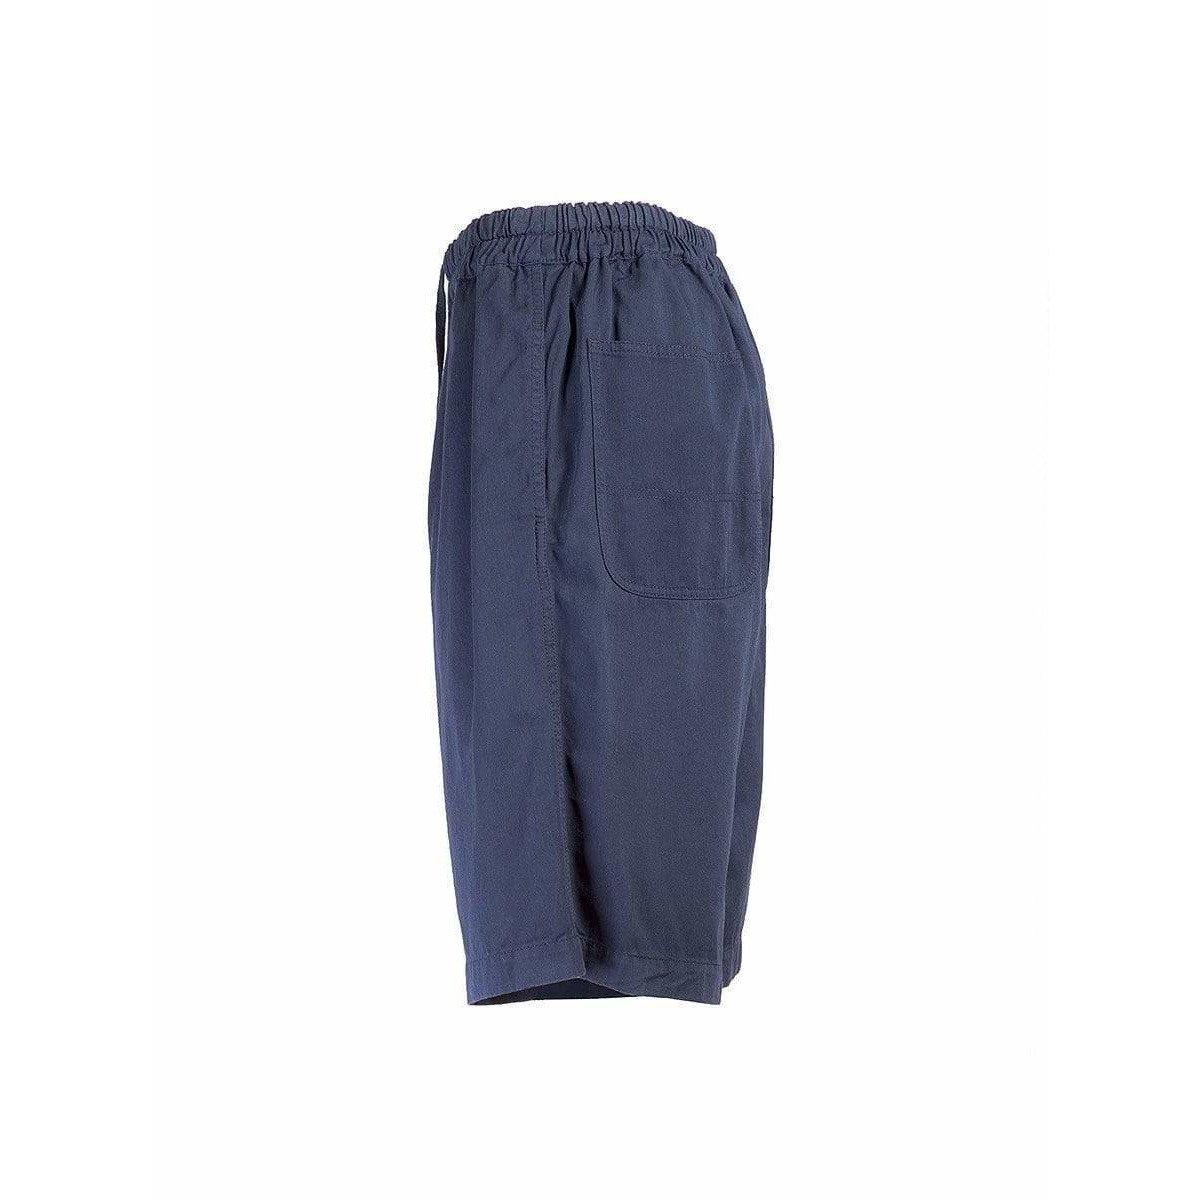 These indigo shorts offer all of the creature comforts: longer length, cotton, elasticized waist, drawstring and two oversized back pockets. What more could you ask from vintage Comme des Garçons?